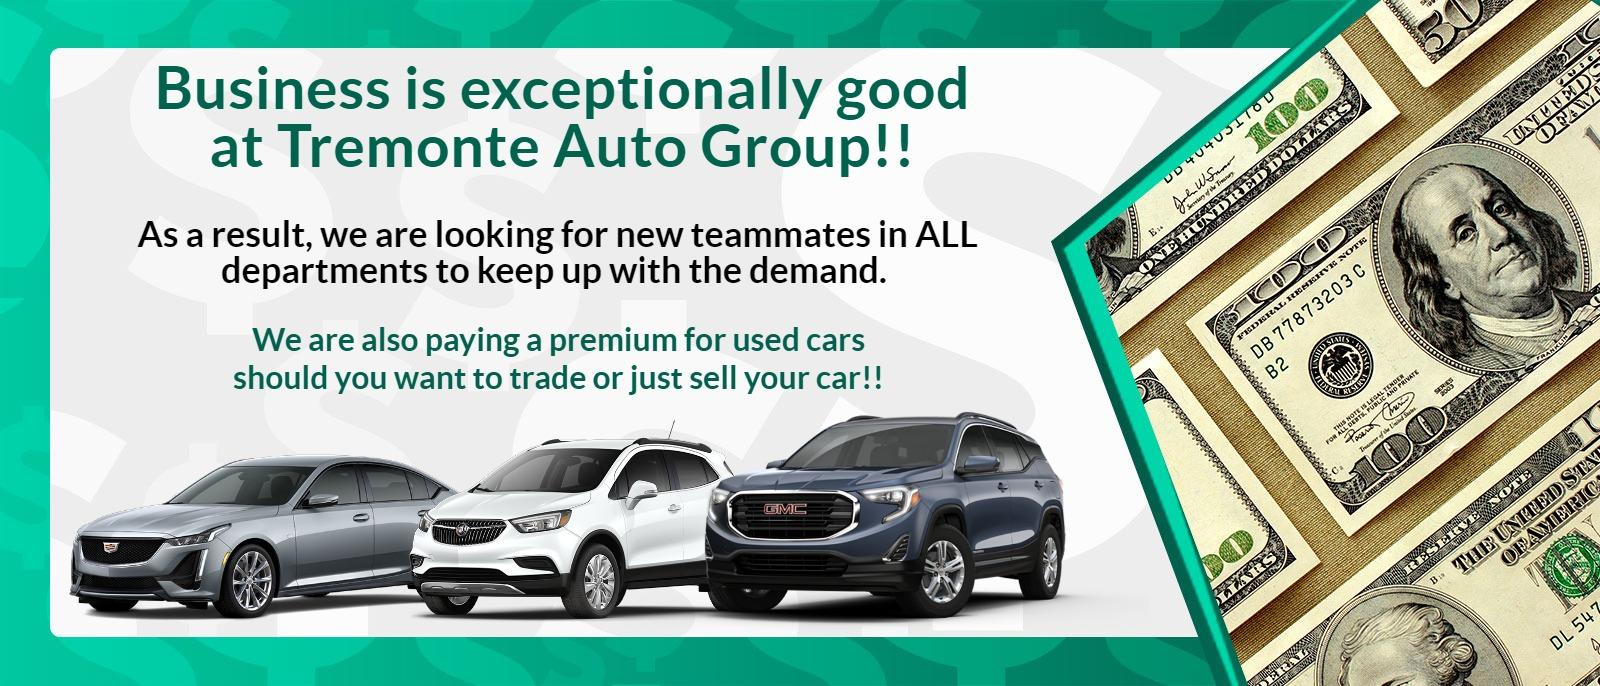 Tremonte Auto Group - Business is Good